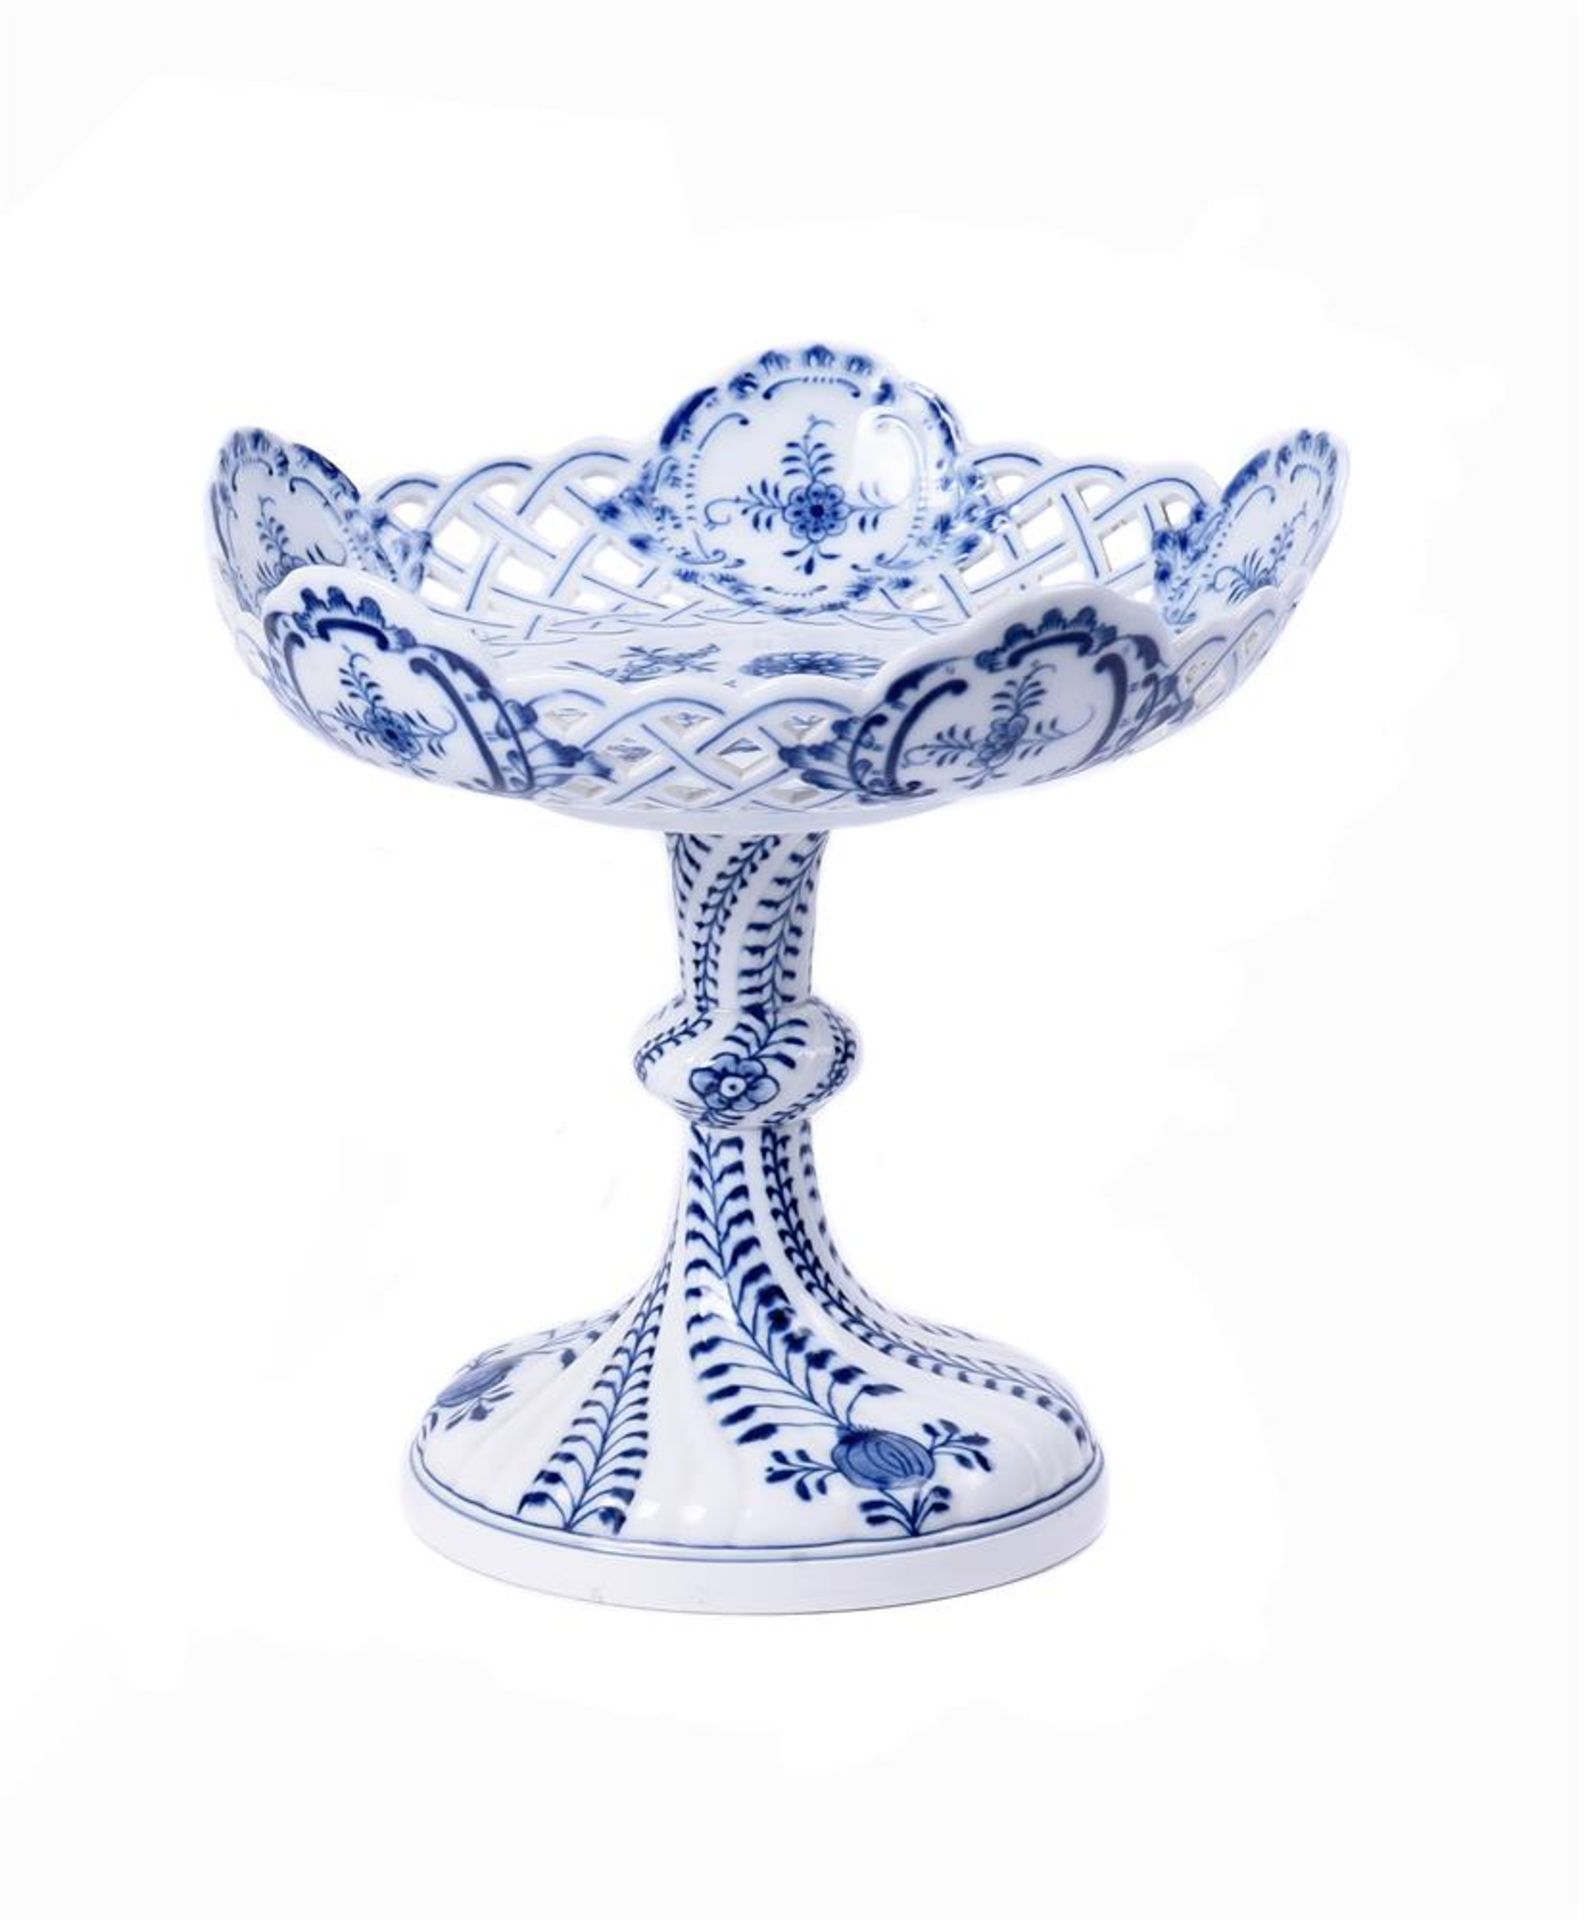 A CANTONESE ENAMELLED PORCELAIN CHAMBERPOT - Image 7 of 7